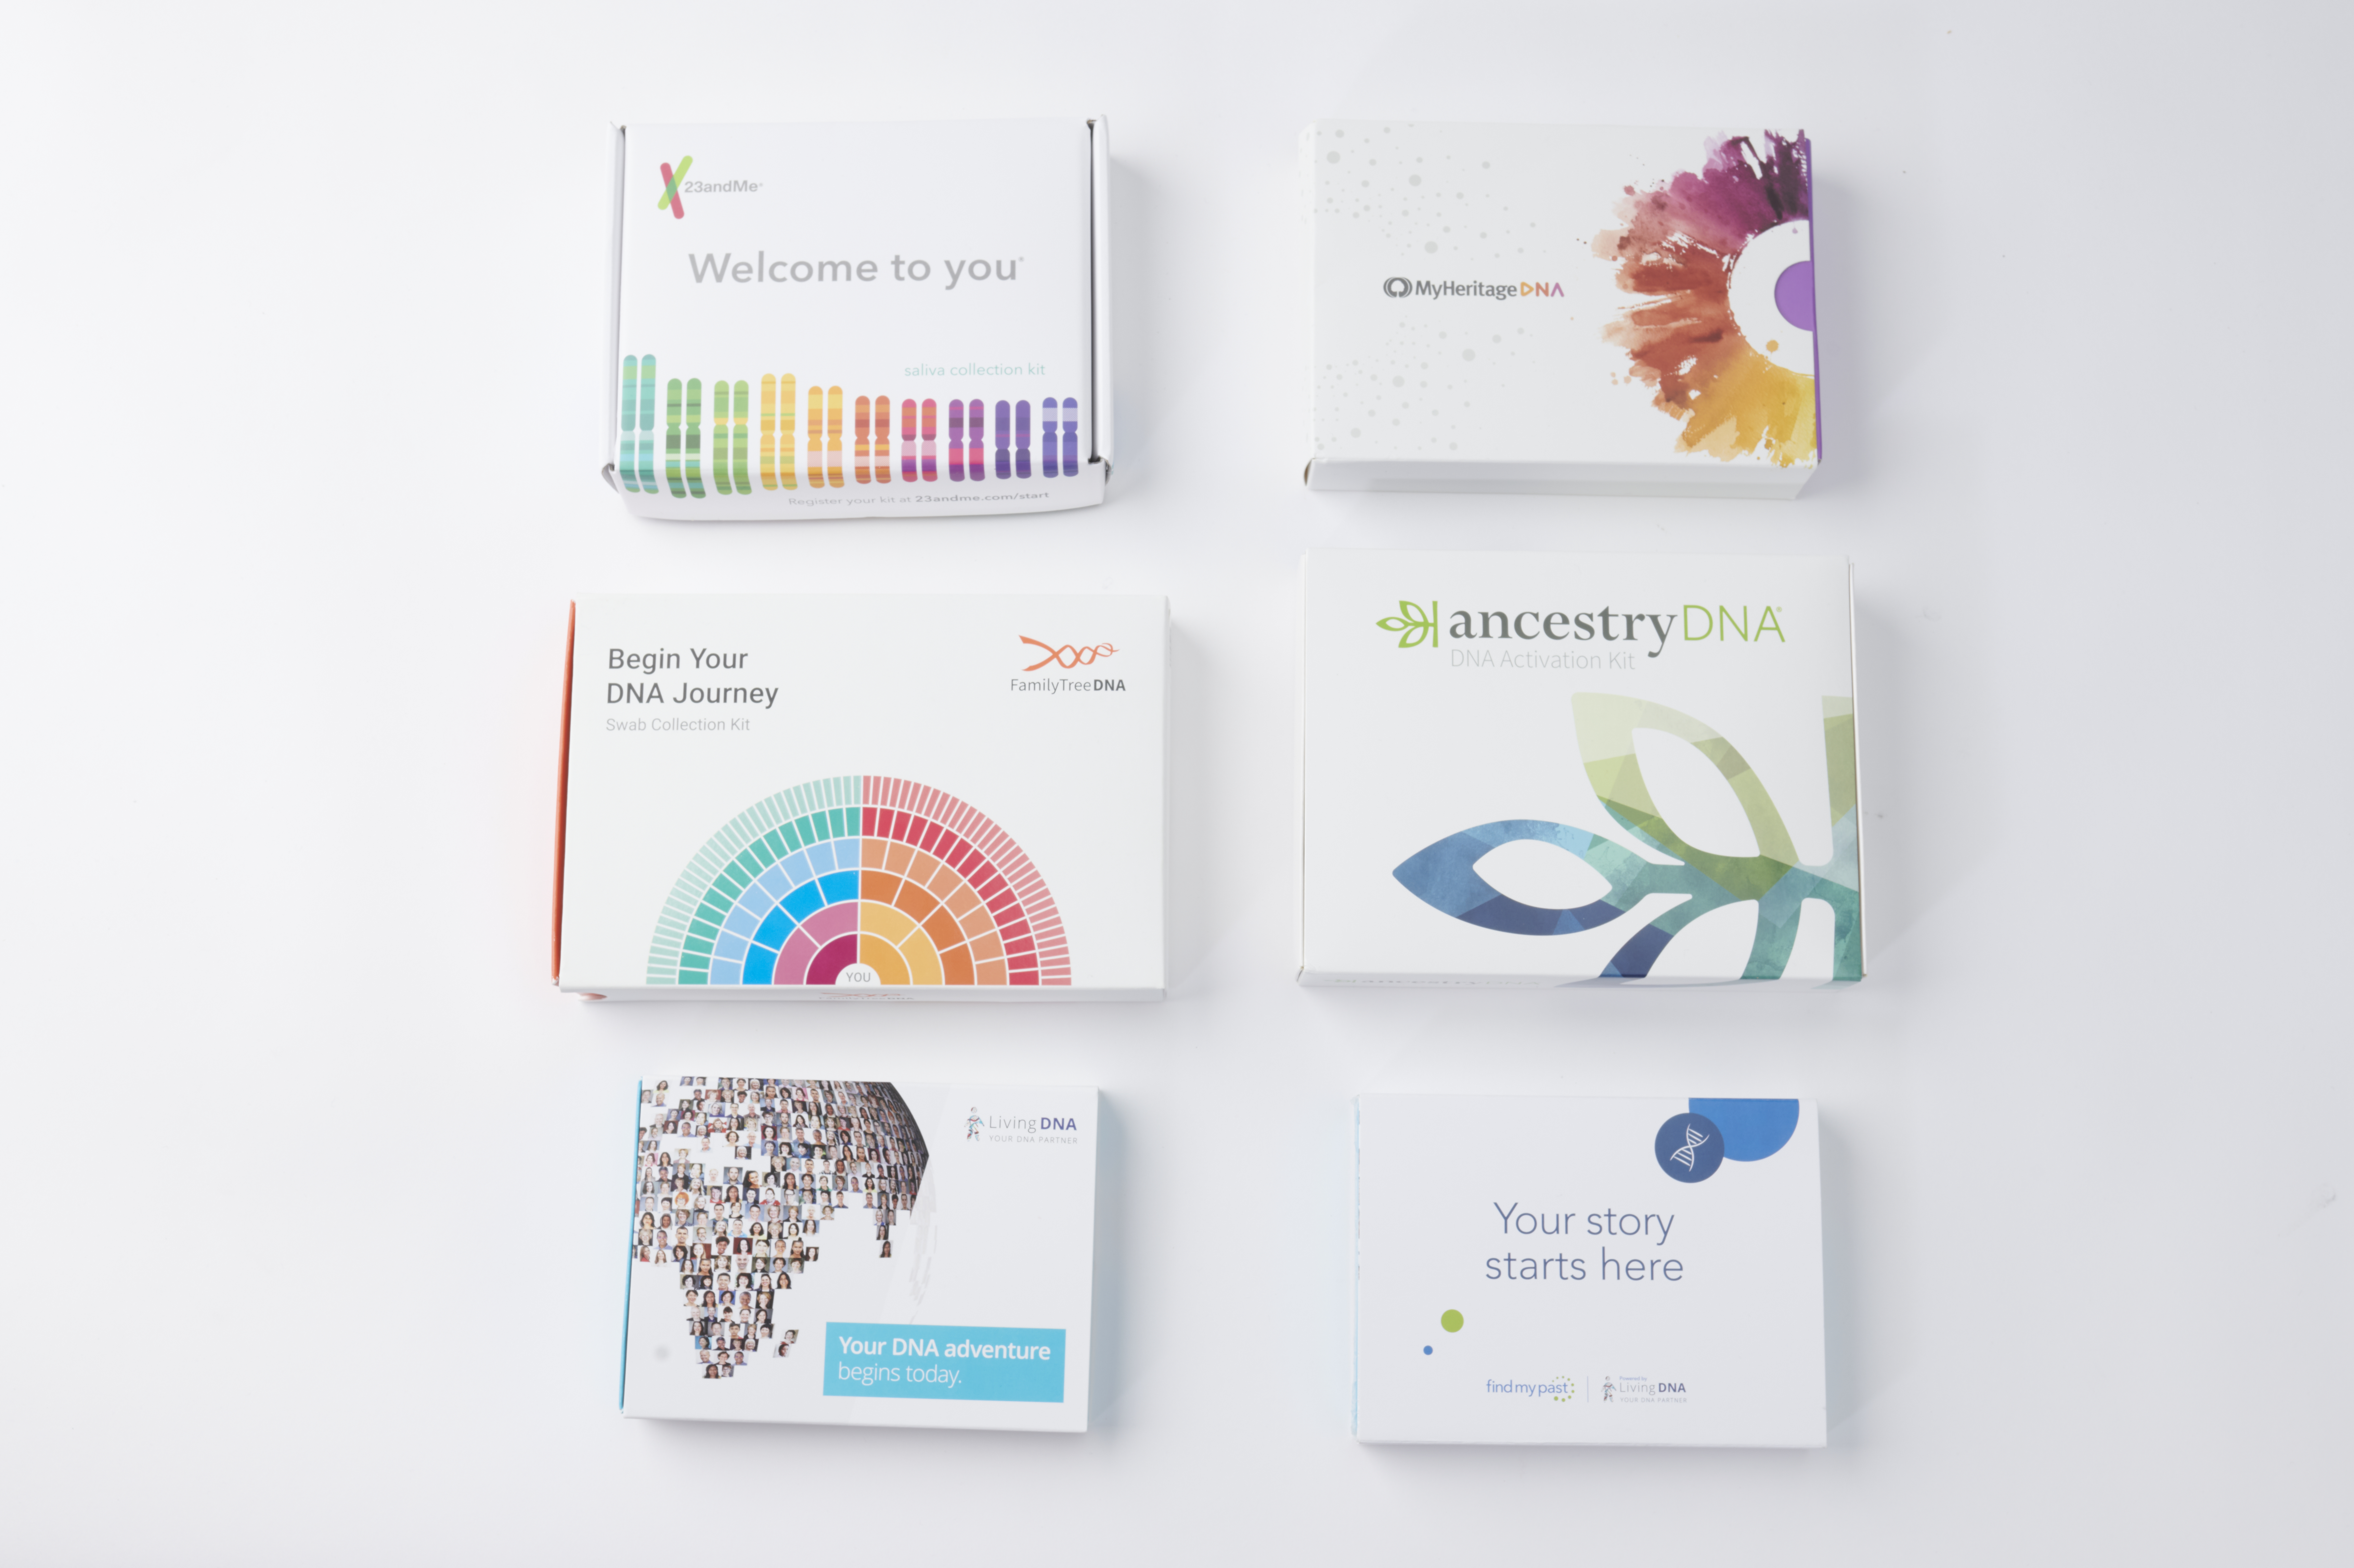 23andMe DNA Tests Are on Sale! Learn About Your Ancestry for Less